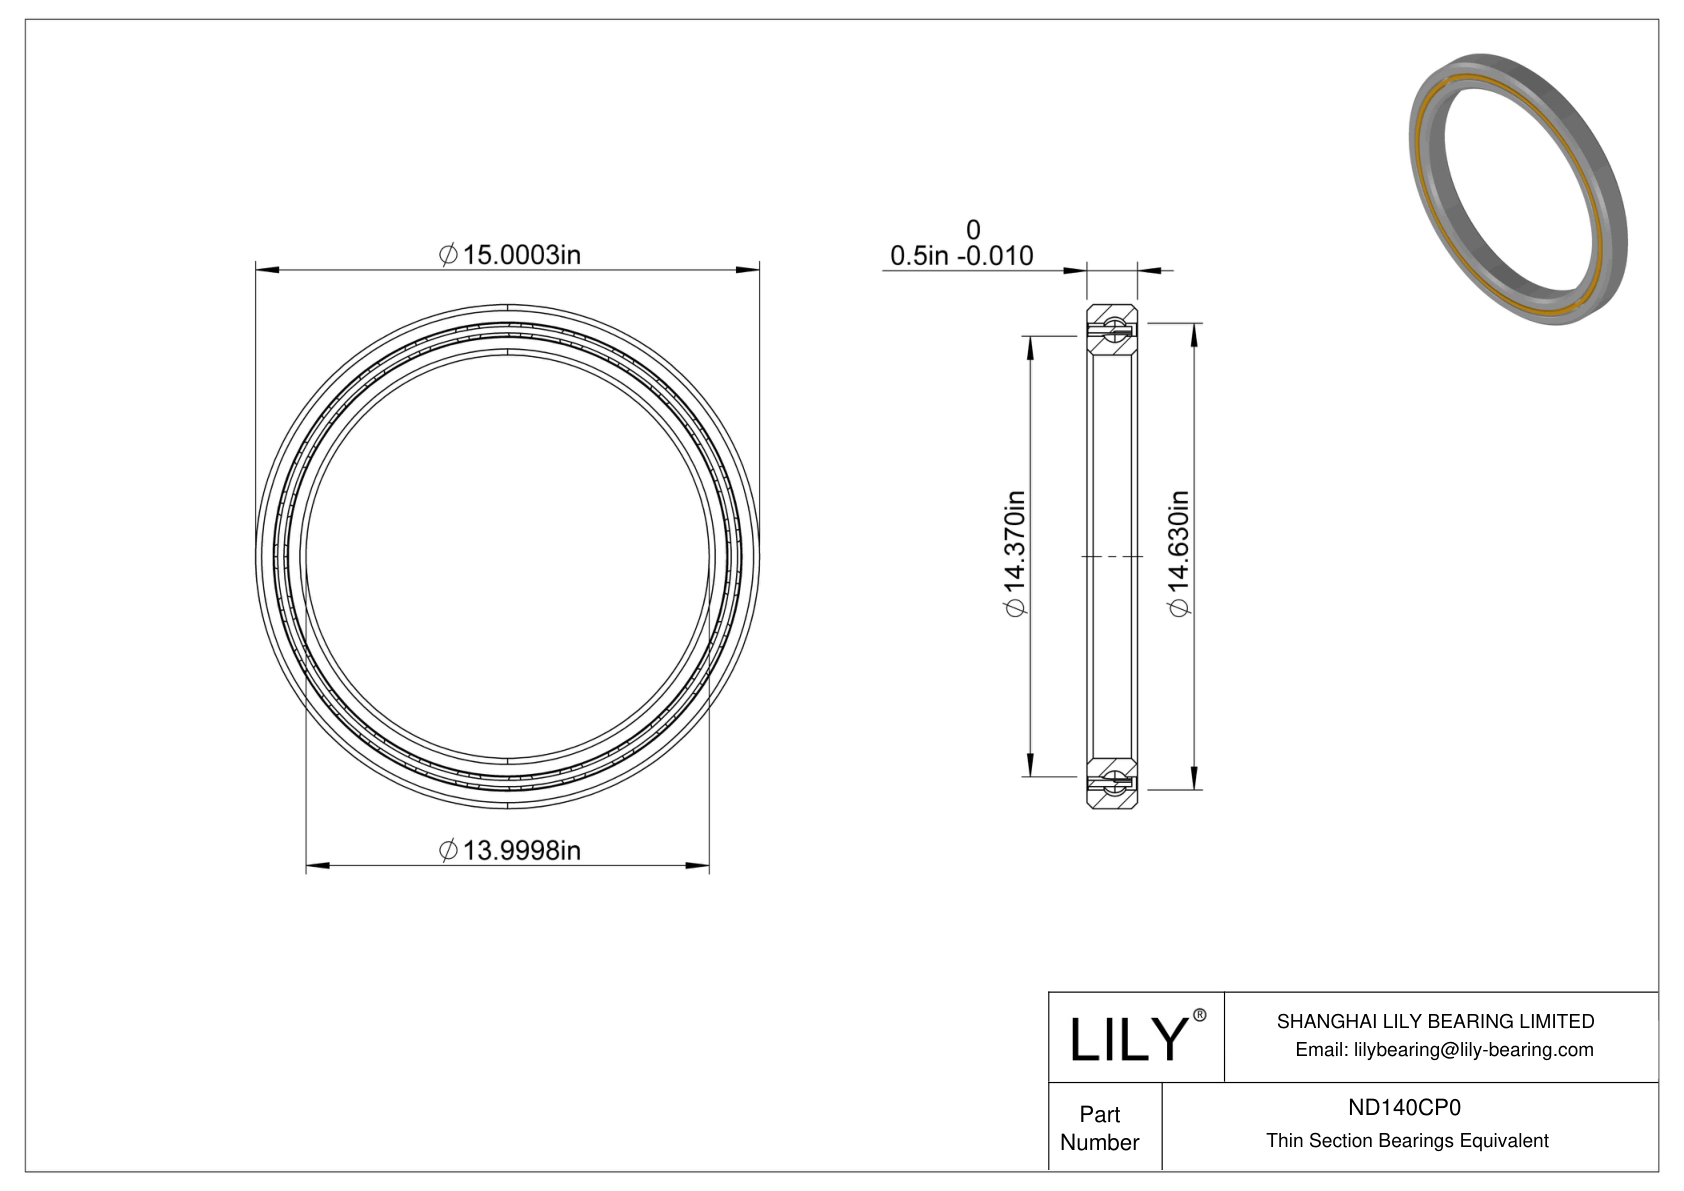 ND140CP0 Constant Section (CS) Bearings cad drawing